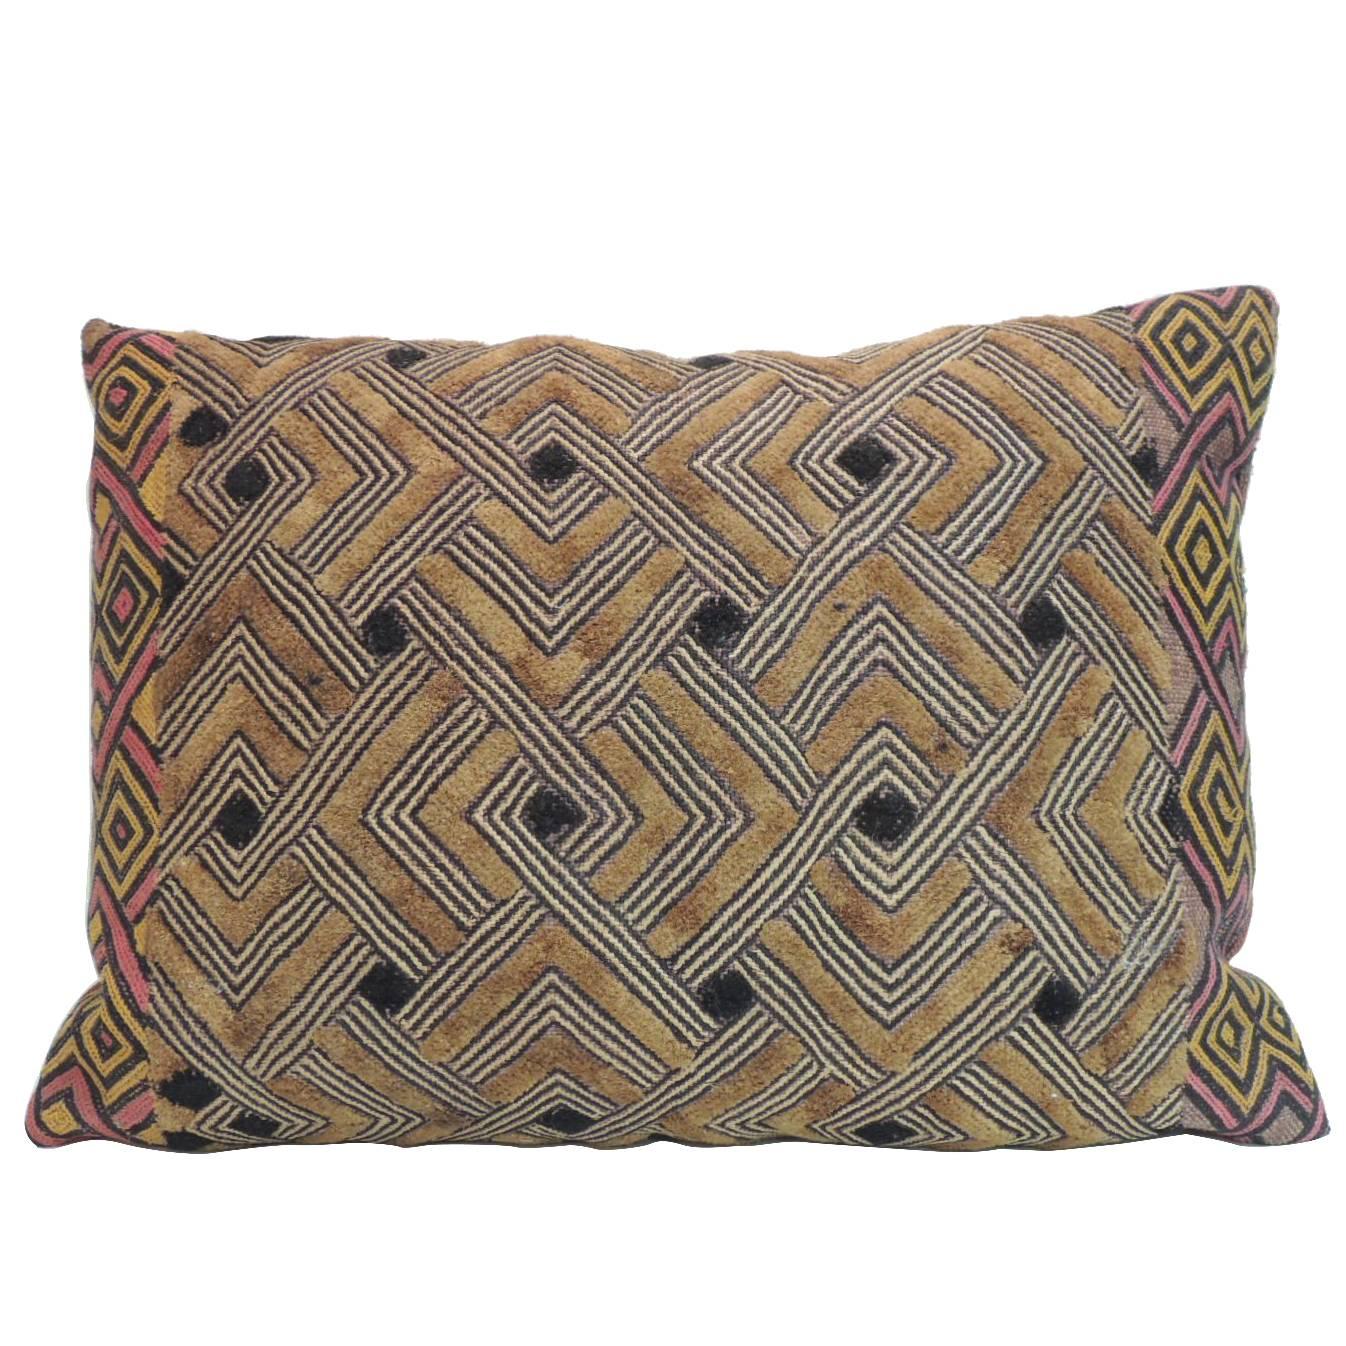 Vintage African Woven Embroidered Decorative Pillow